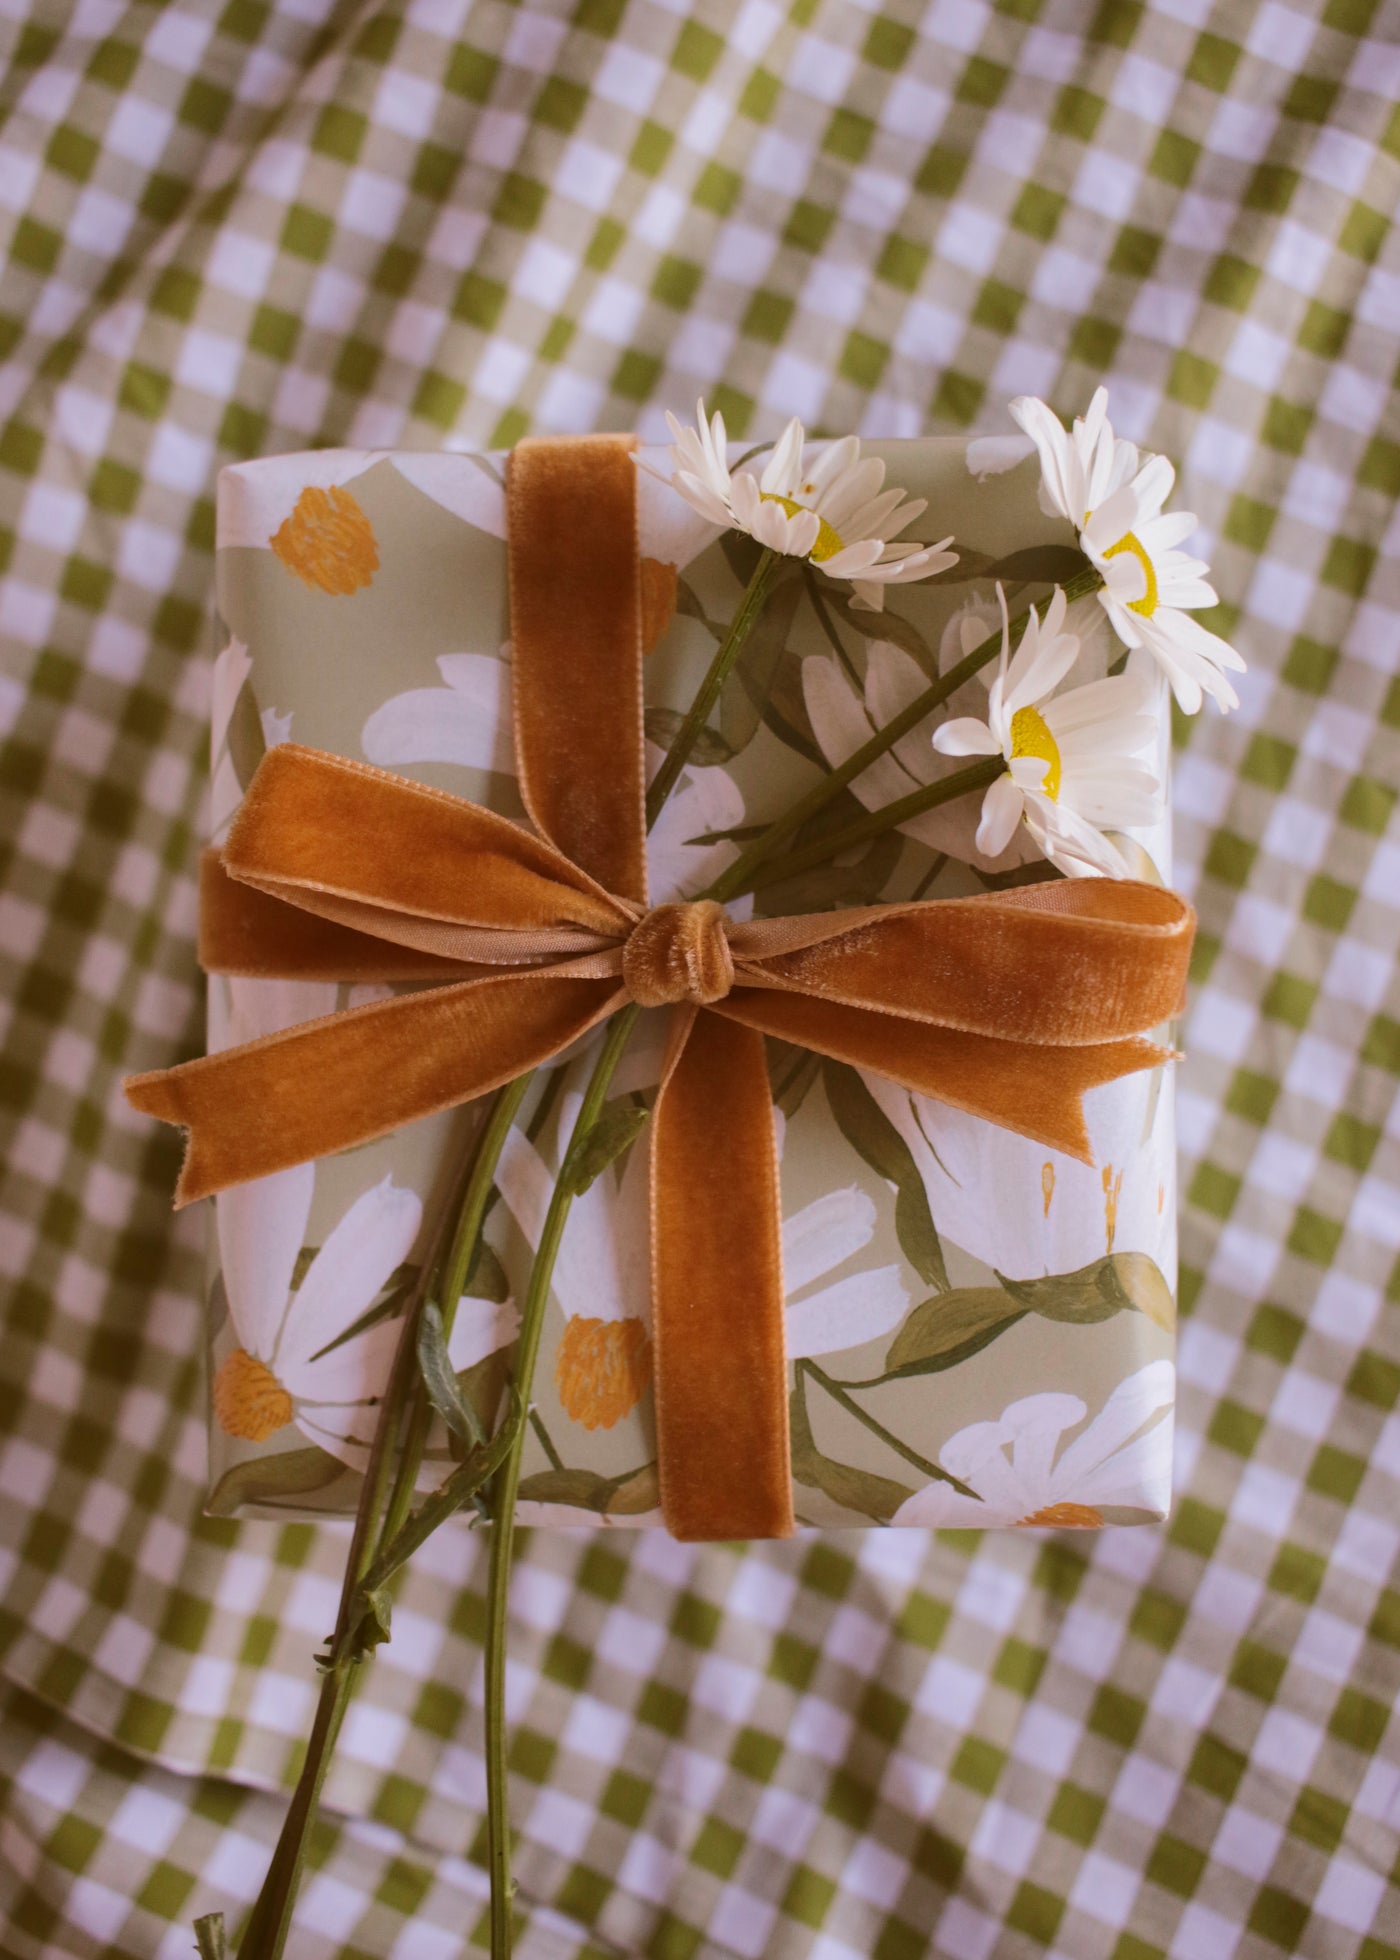 a gift wrapped in green, daisy-patterned wrapping paper, tied with a ochre velvet ribbon